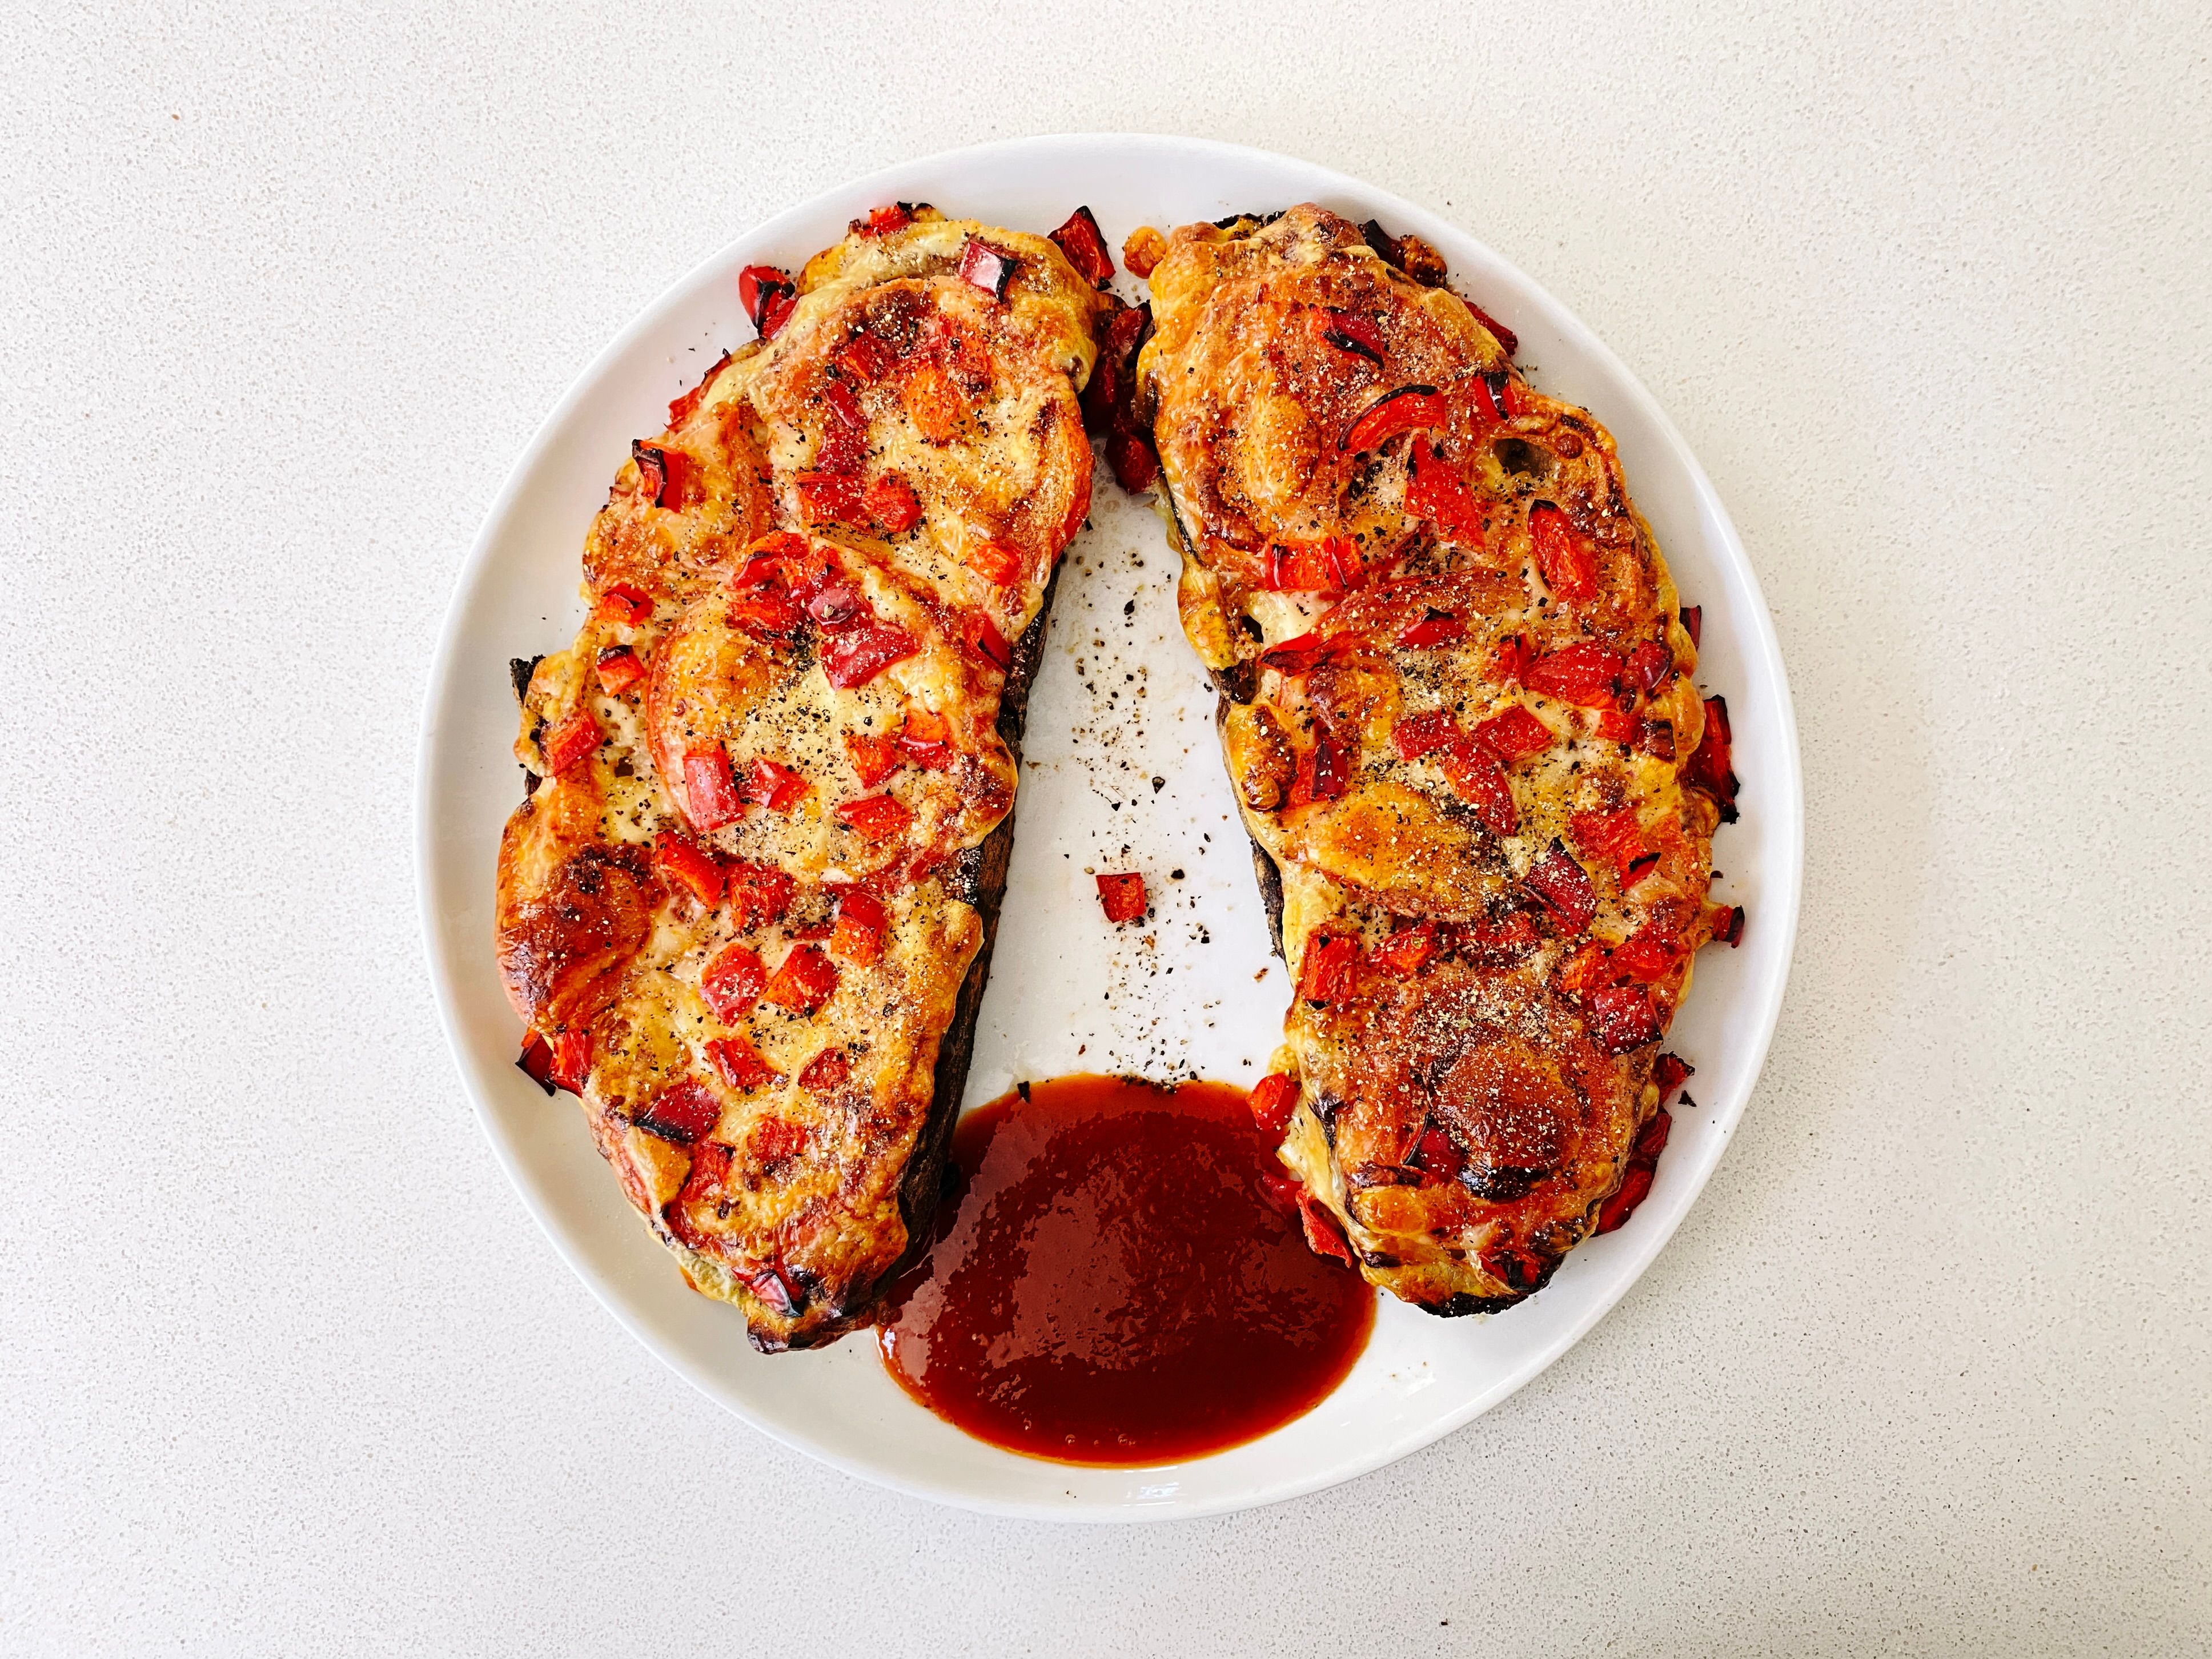 A photo of two slices of toasted bread with tomato and golden-brown cheese and loads of capsicum on top, covered in pepper, sitting on a plate. There's a big squirt of Tabasco-brand sriracha sauce on the plate in between the two slices of bread.